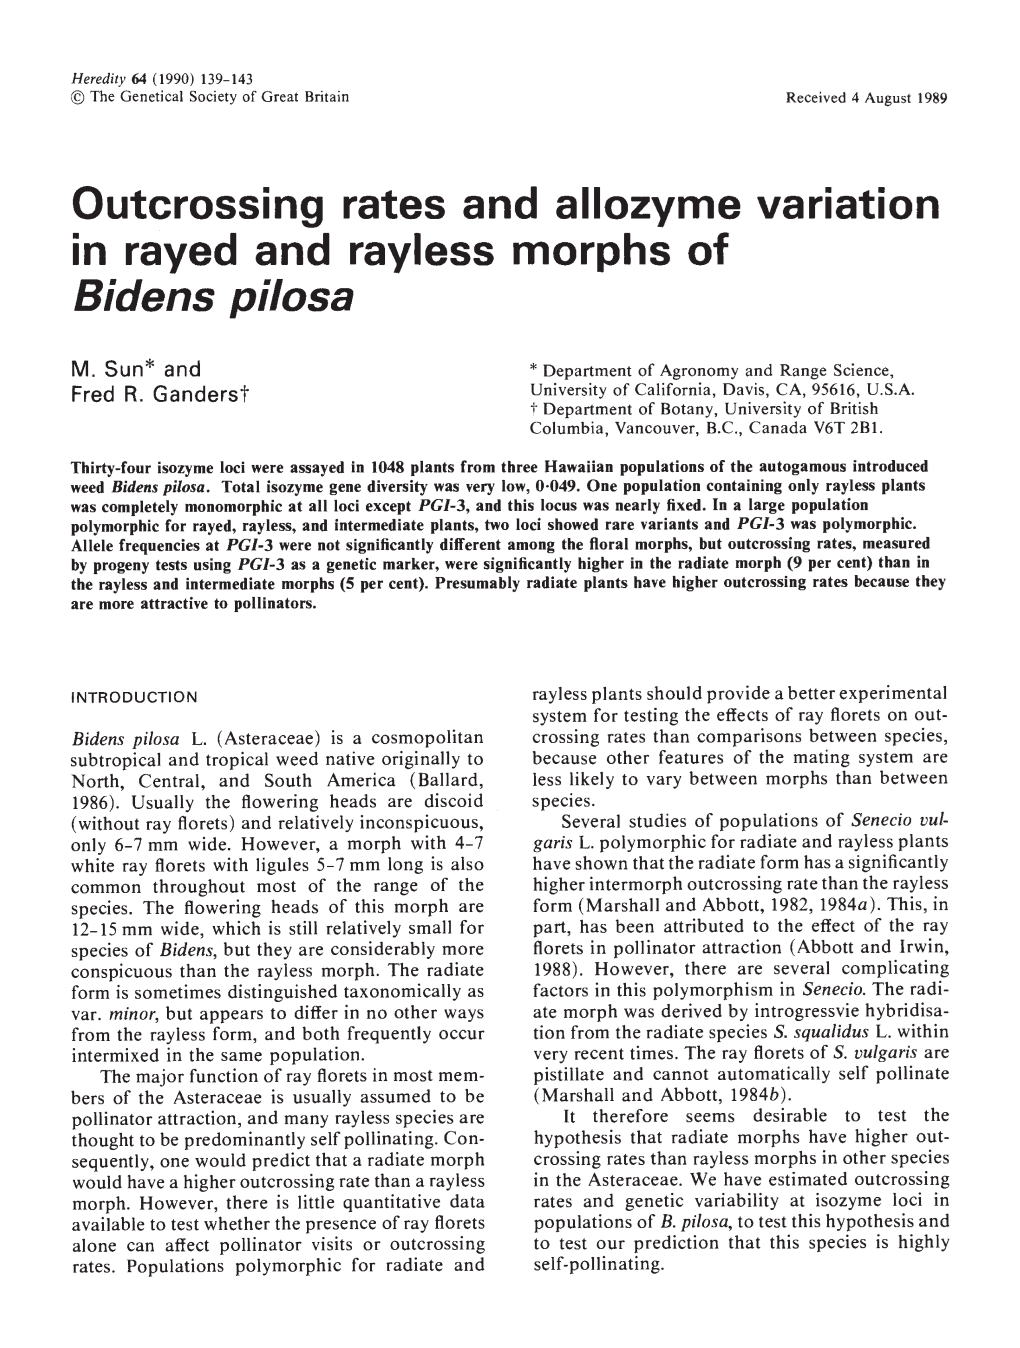 Outcrossing Rates and Allozyme Variation in Rayed and Rayless Morphs of Bidens Pilosa